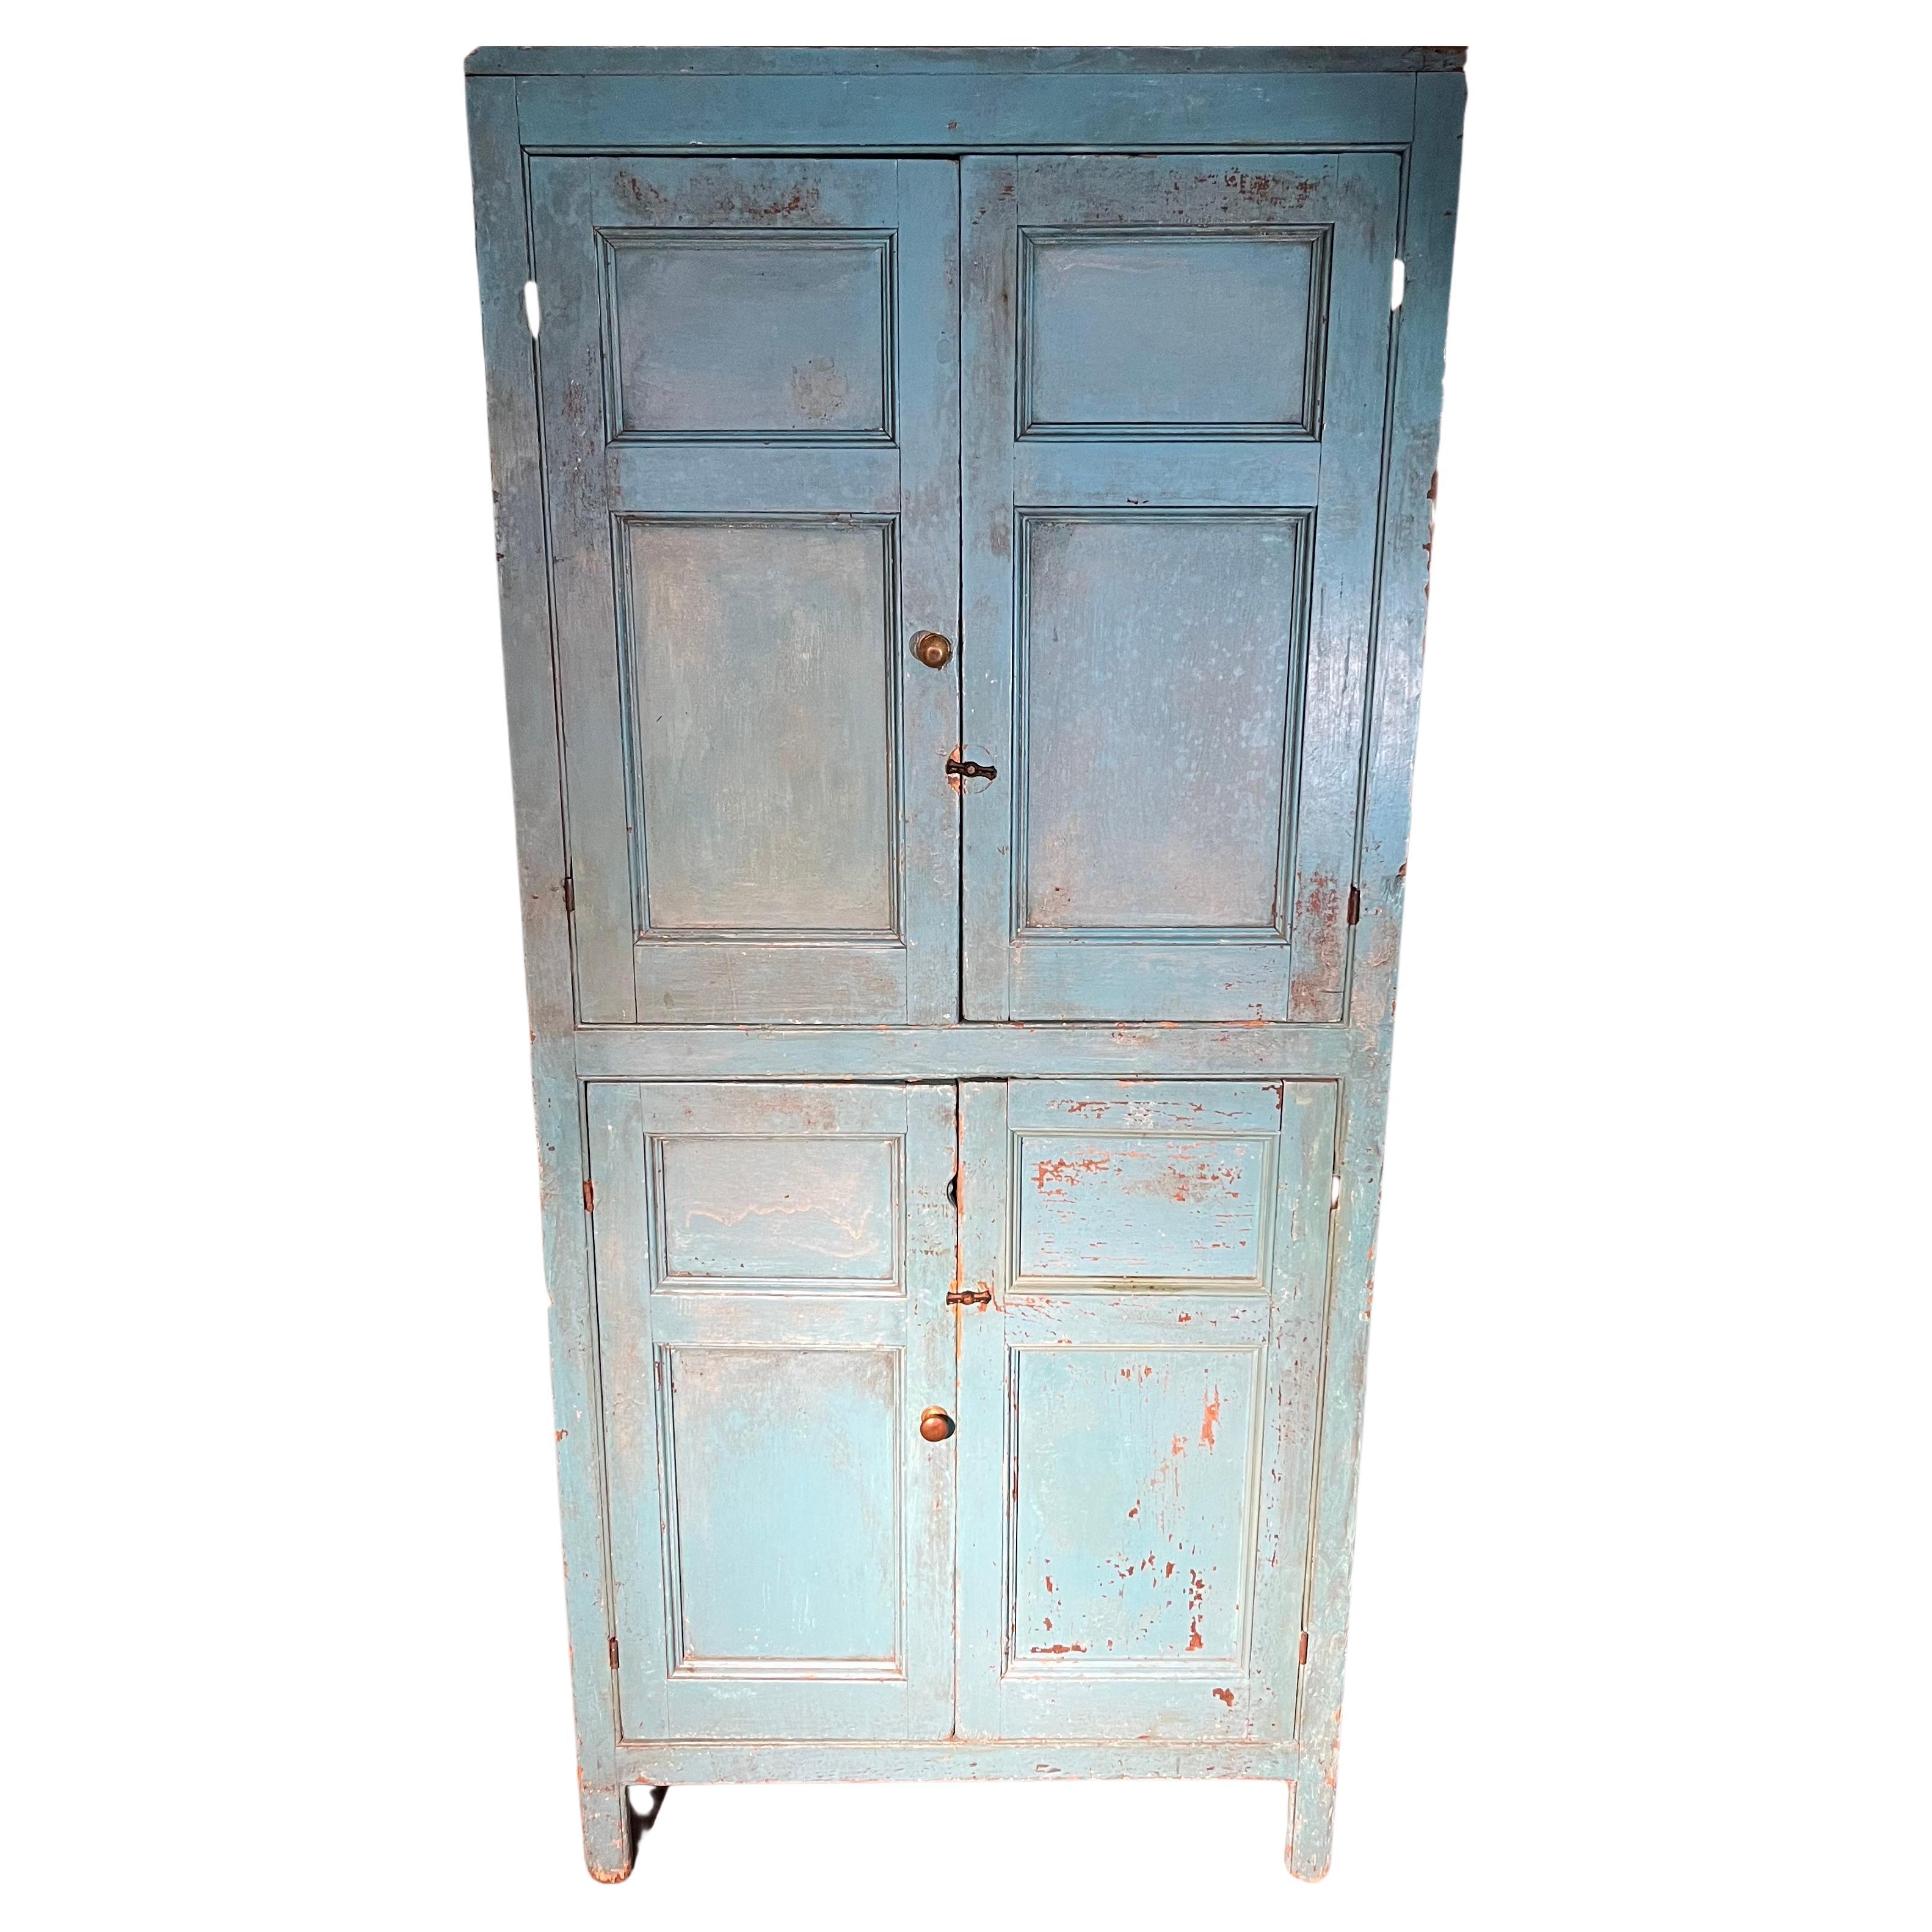 1820 Pine Country Cupboard in Original Blue Paint